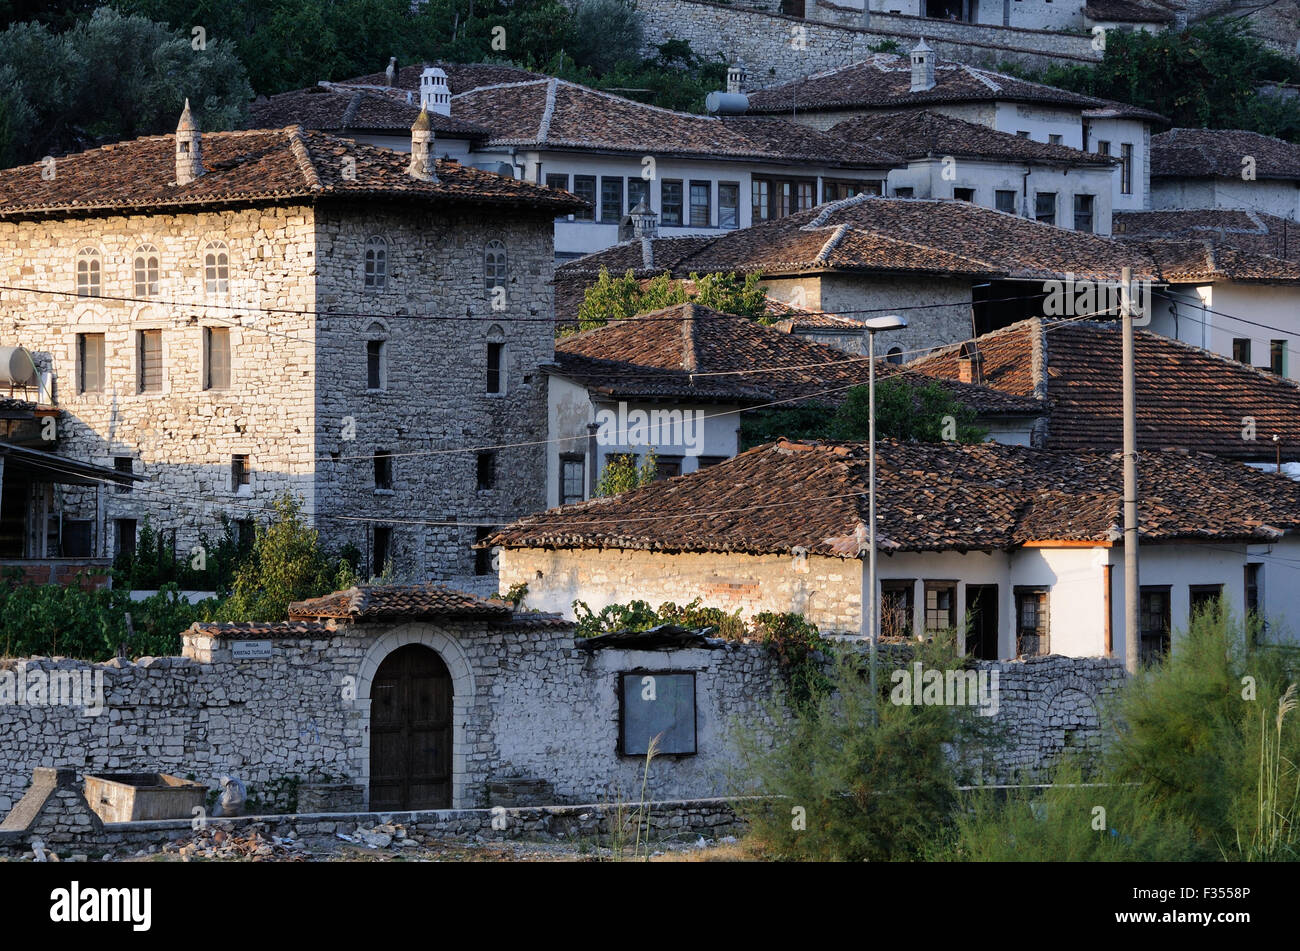 Stone houses with tiled roofs in the  world heritage site of  Mangalemi, The Ottoman quarter of Berat.  Berat, Albania. Stock Photo